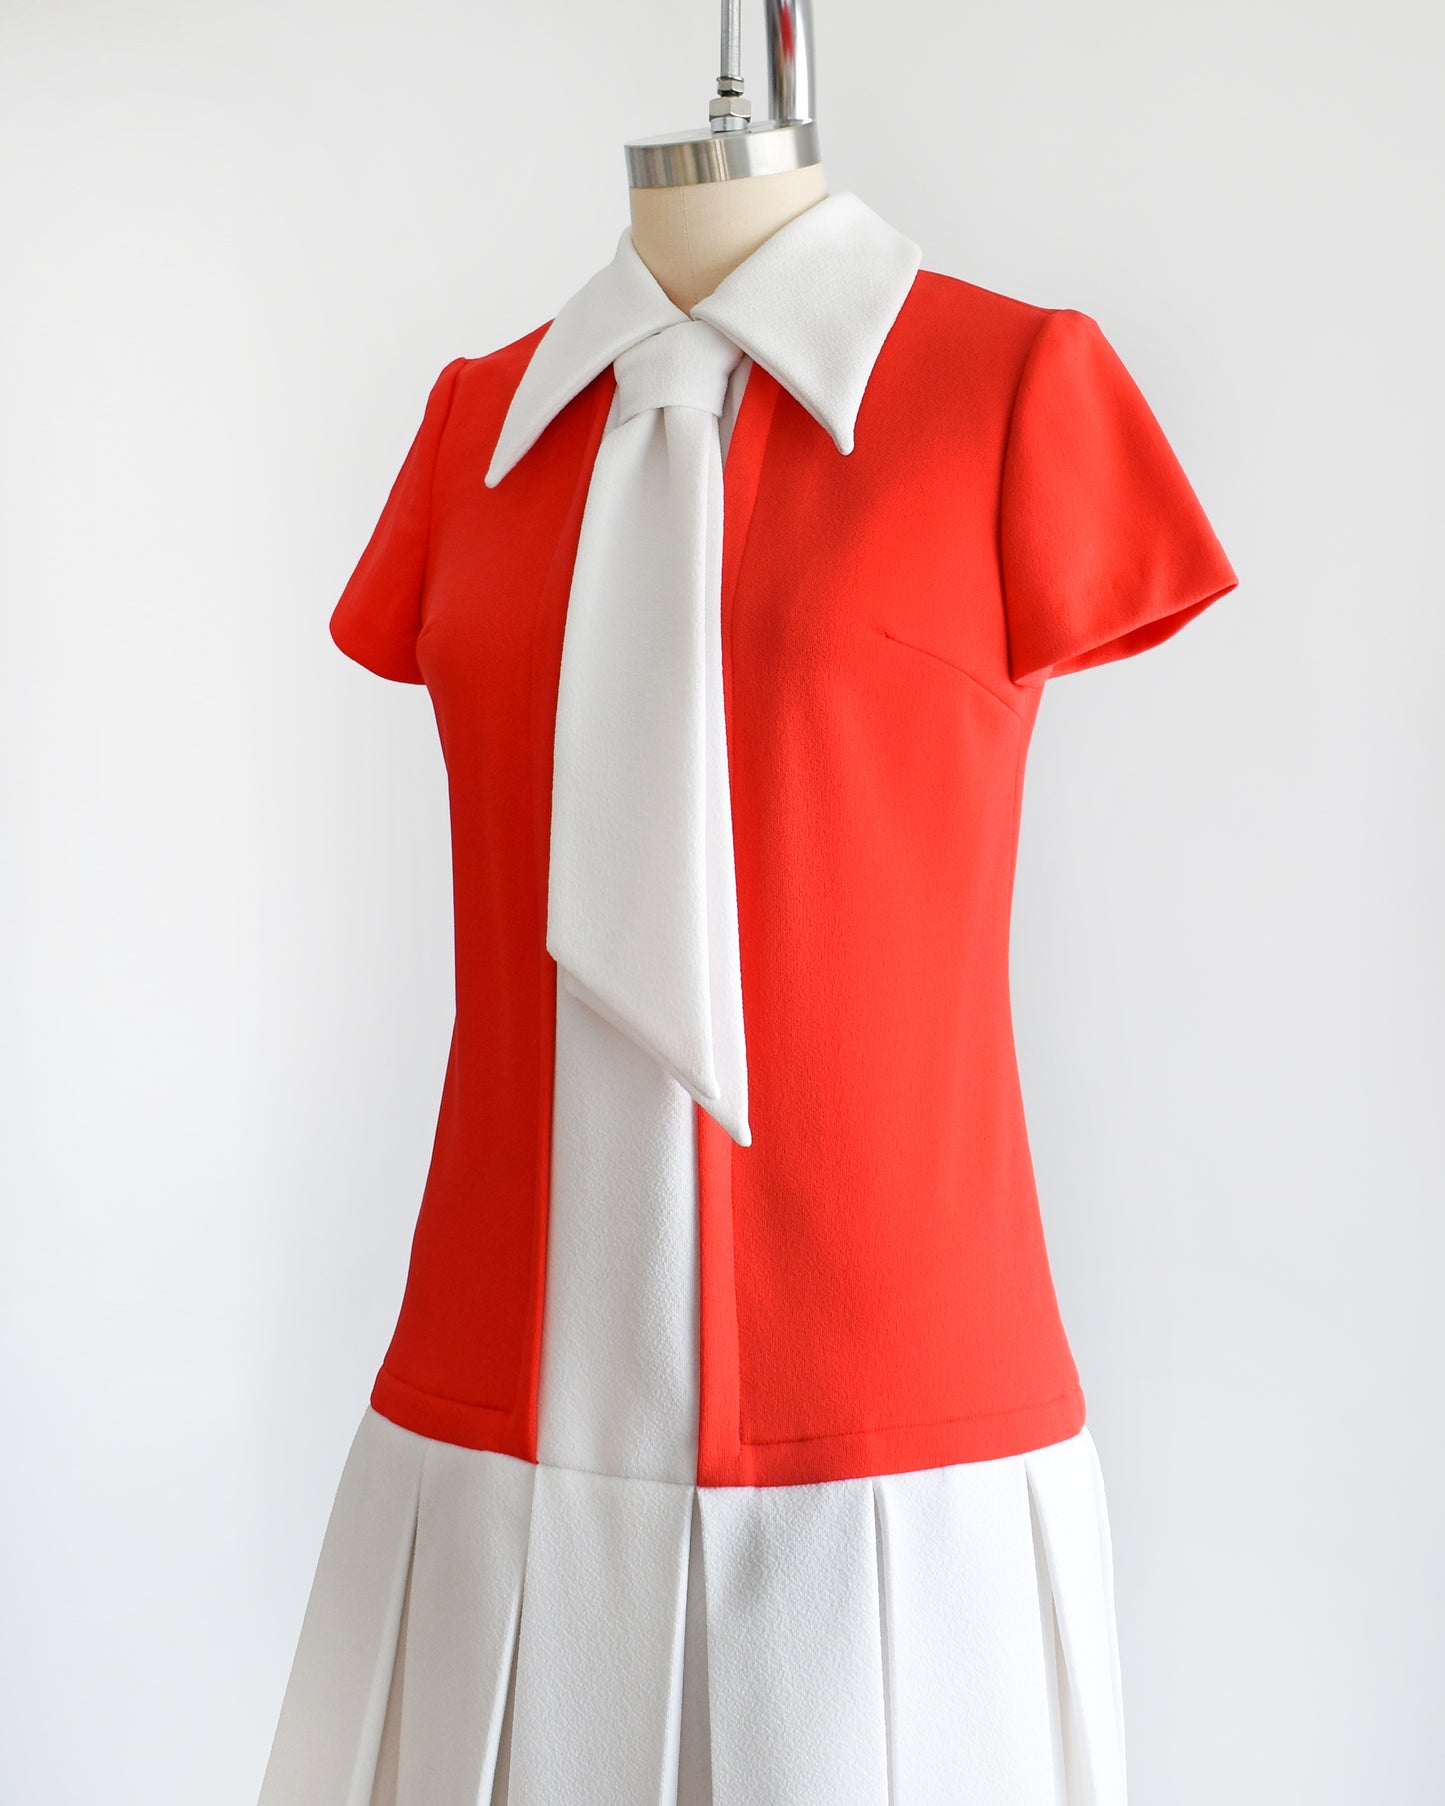 Side front view of a vintage late 1960s early 1970s drop waist dress features a red bodice with a white collared neckline and ascot tie, accompanied by a white stripe down the front that flows into the white pleated skirt